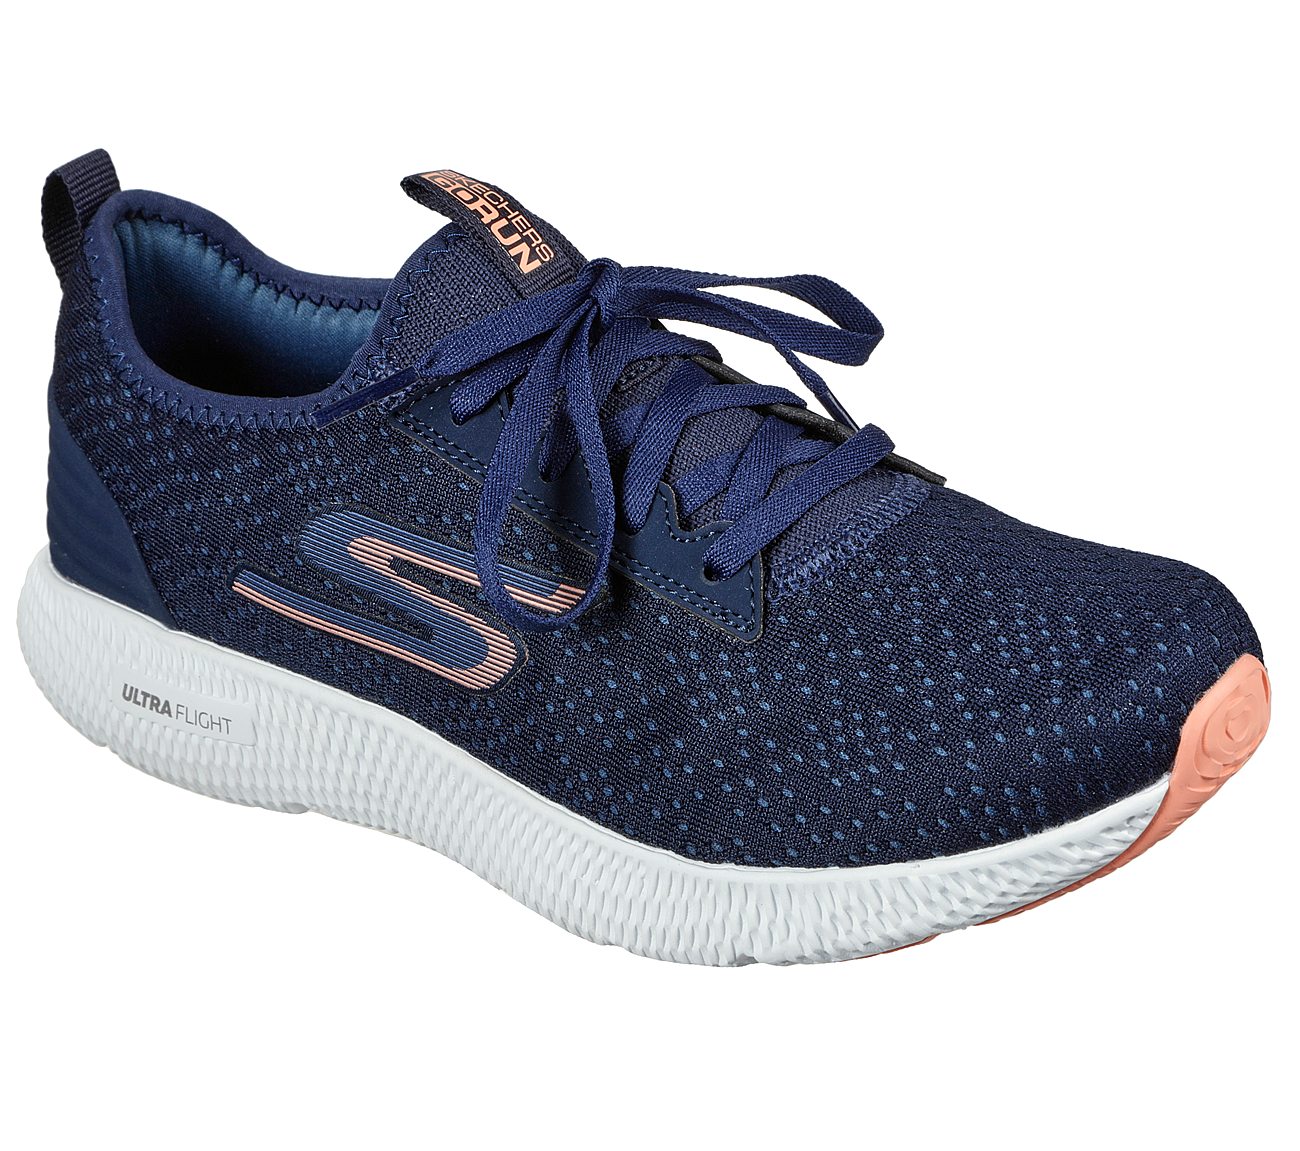 HORIZON - COOL IT, NAVY/CORAL Footwear Right View